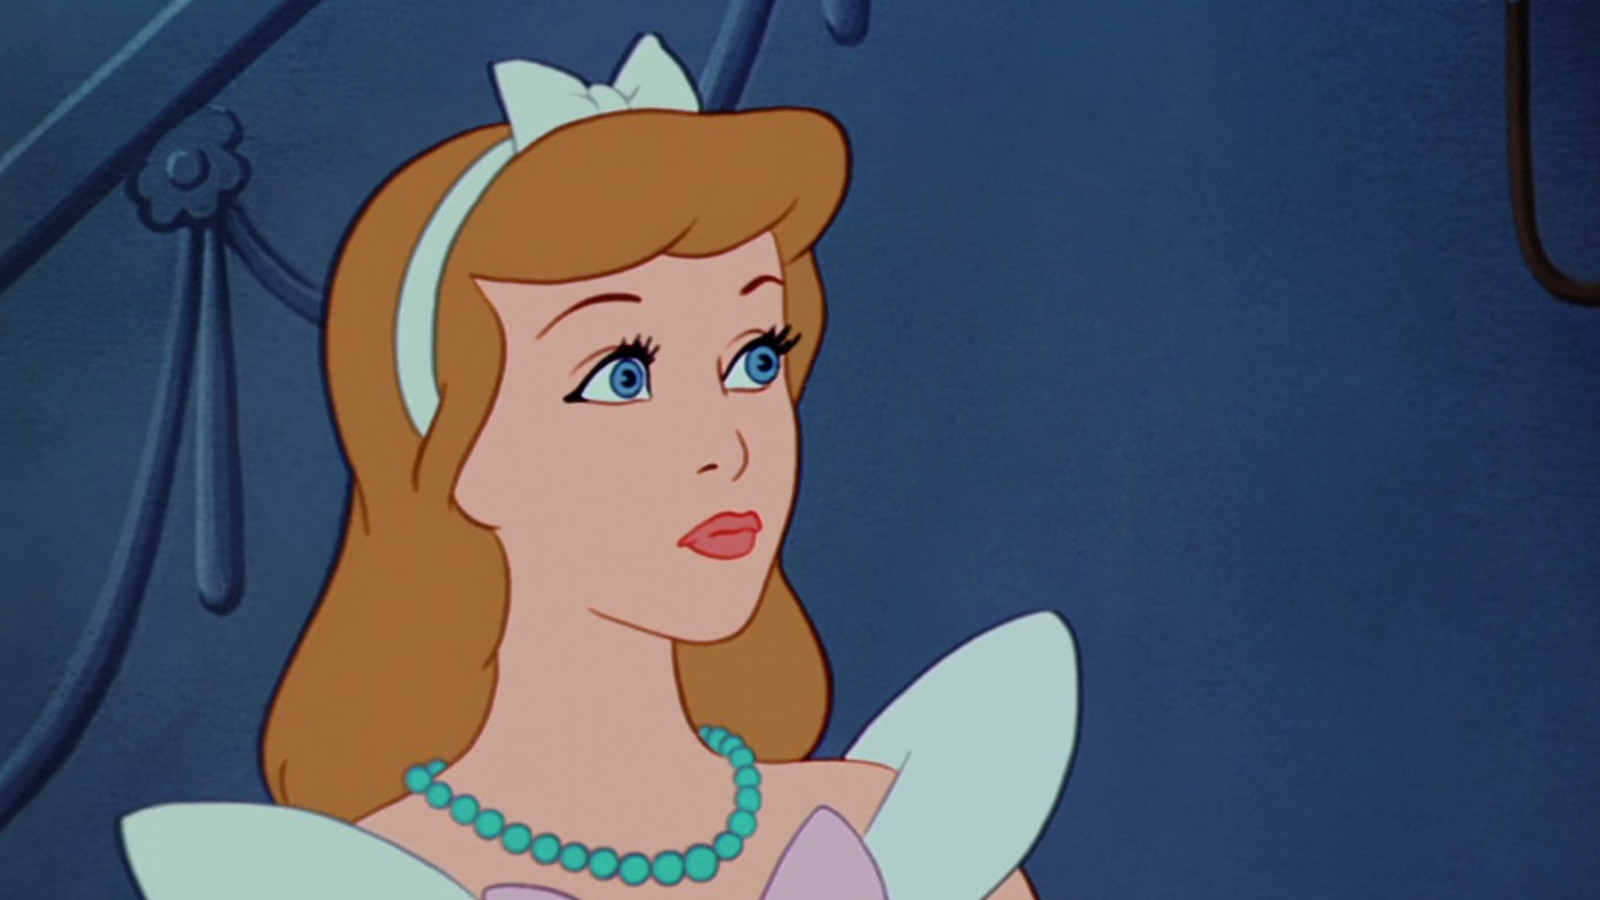 Without The Success Of Cinderella, Disney Would Have Likely Folded